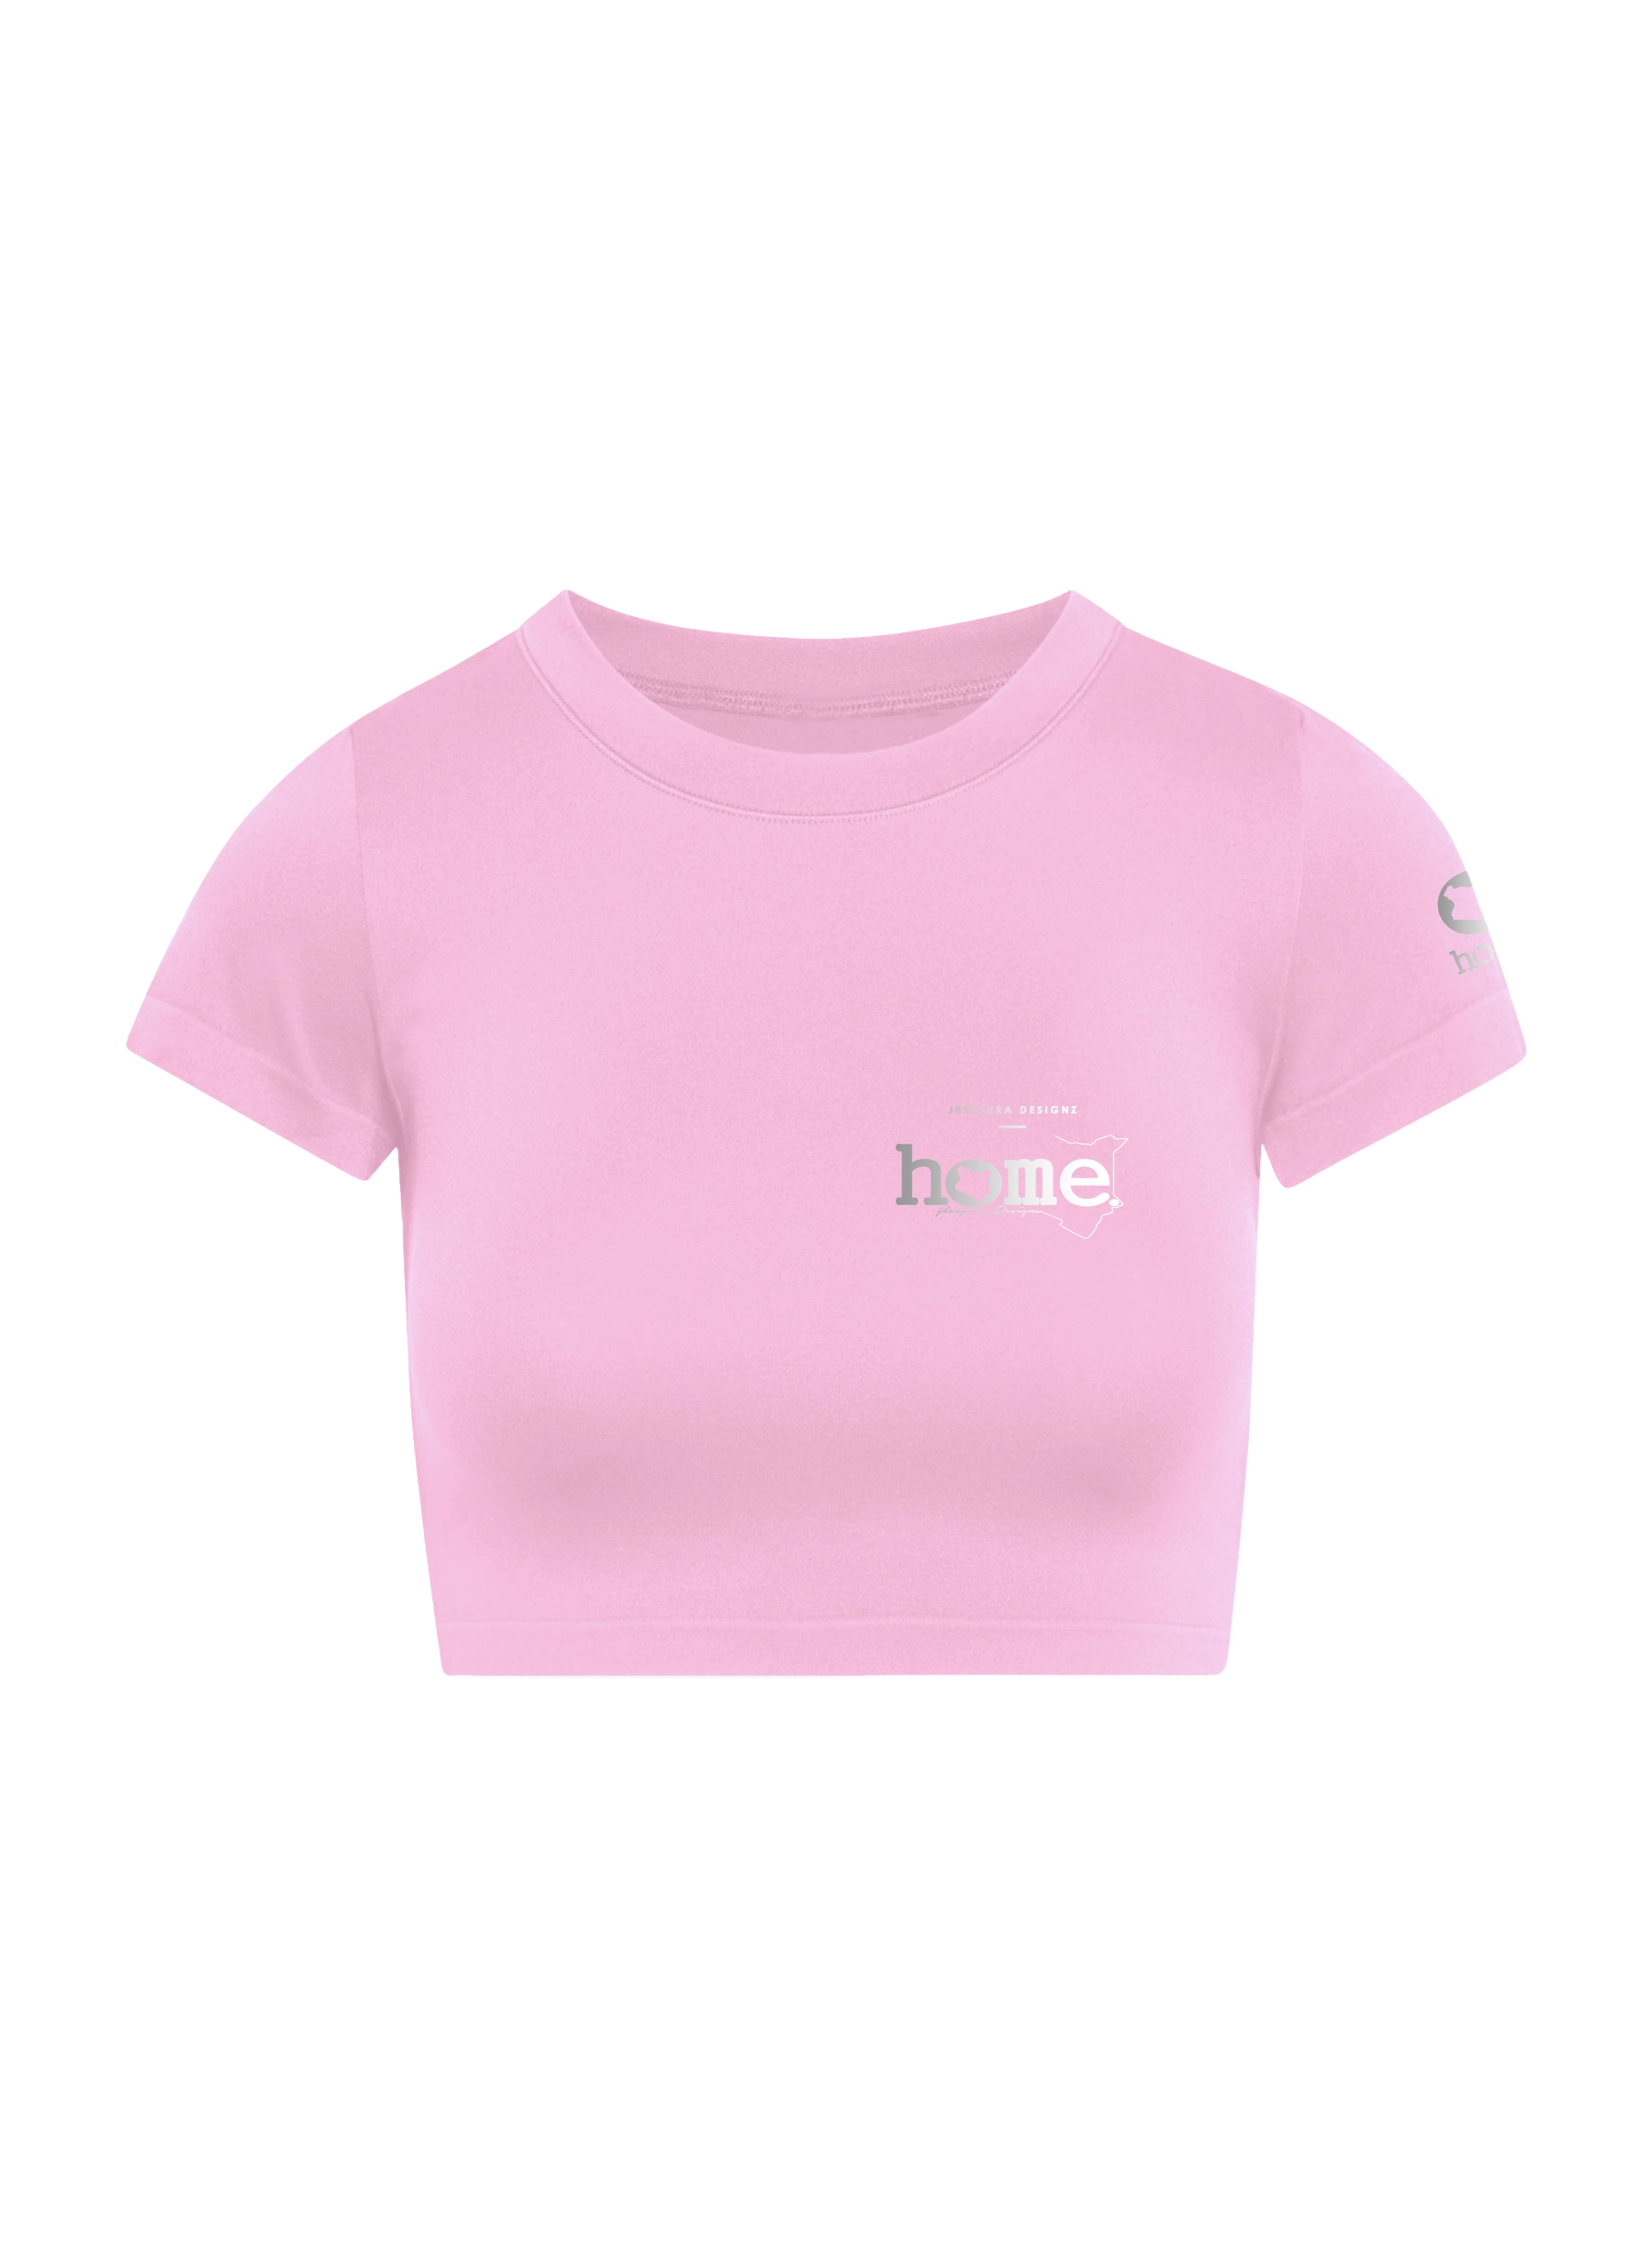 home_254 SHORT SLEEVED PINK CROPPED ARIA TEE WITH A SILVER 3D WORDS PRINT 